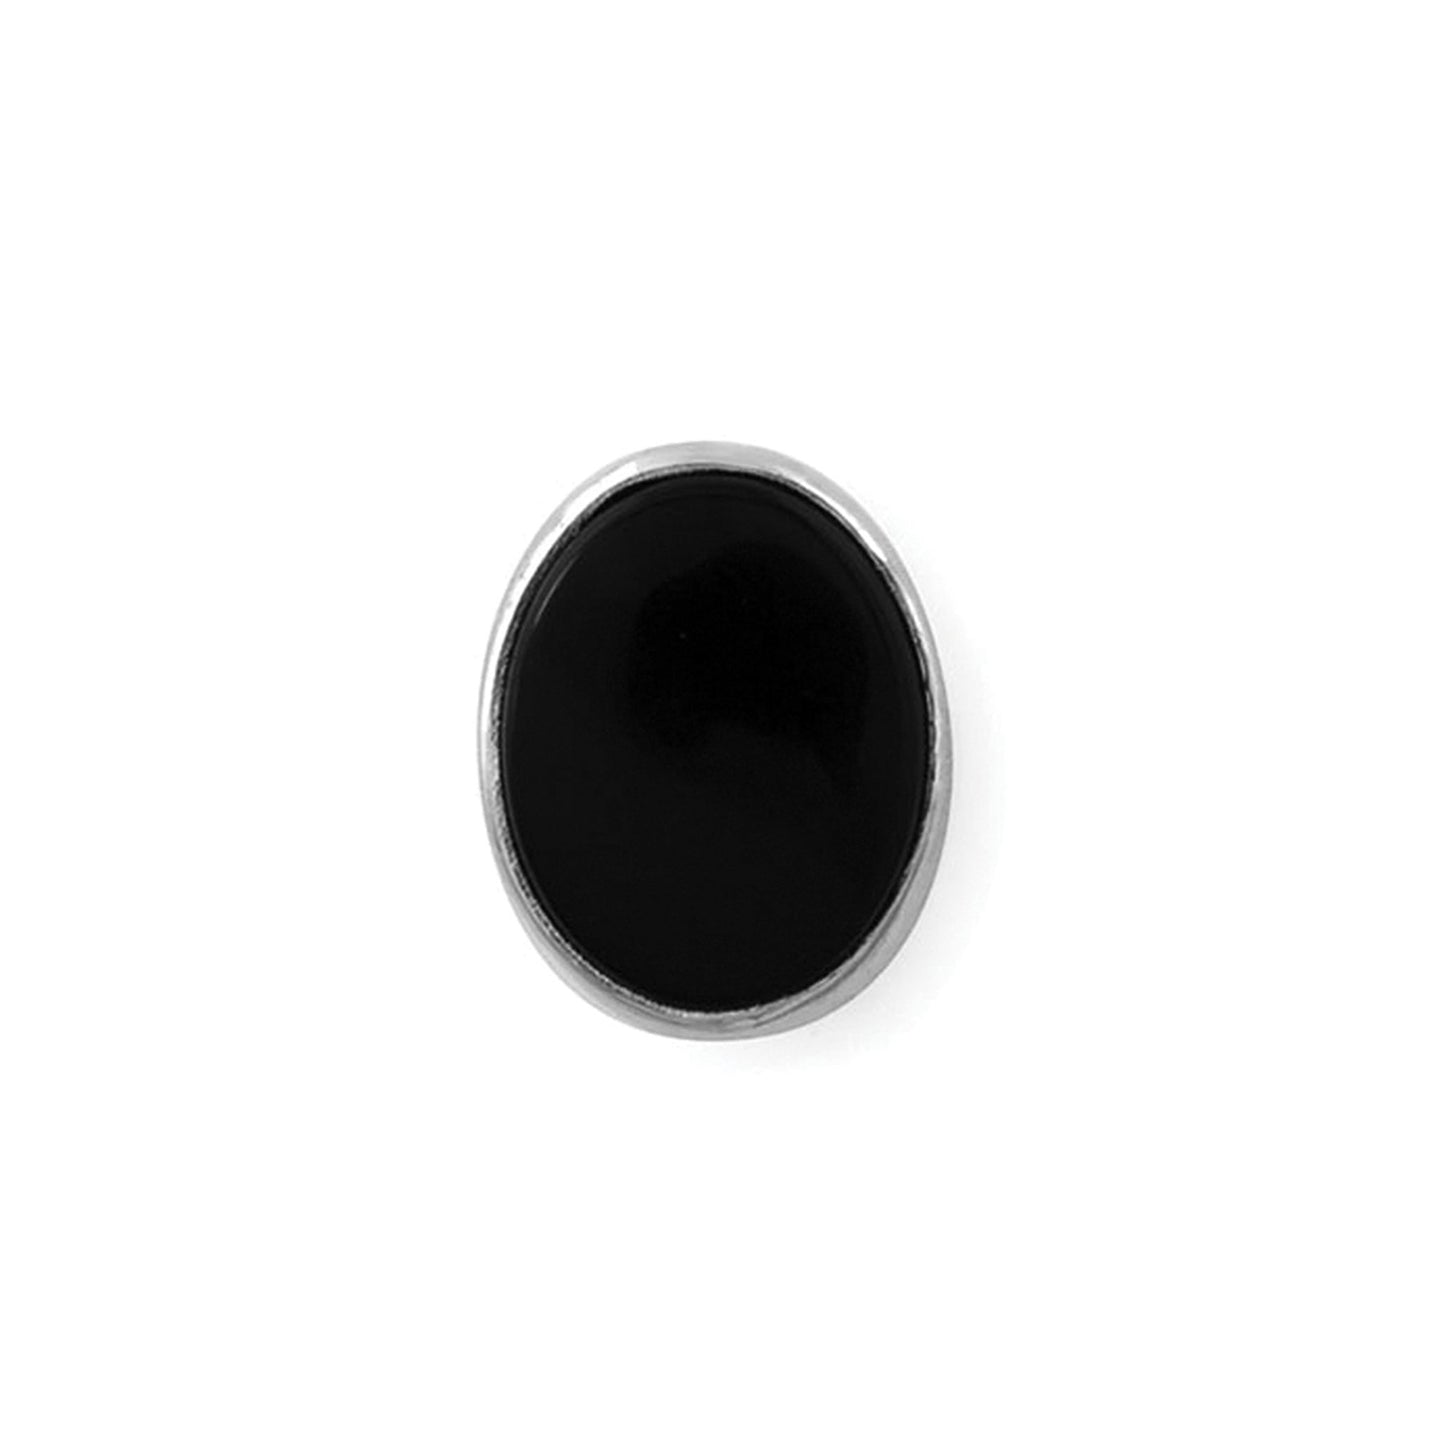 A oval onyx sterling silver tie tack displayed on a neutral white background.